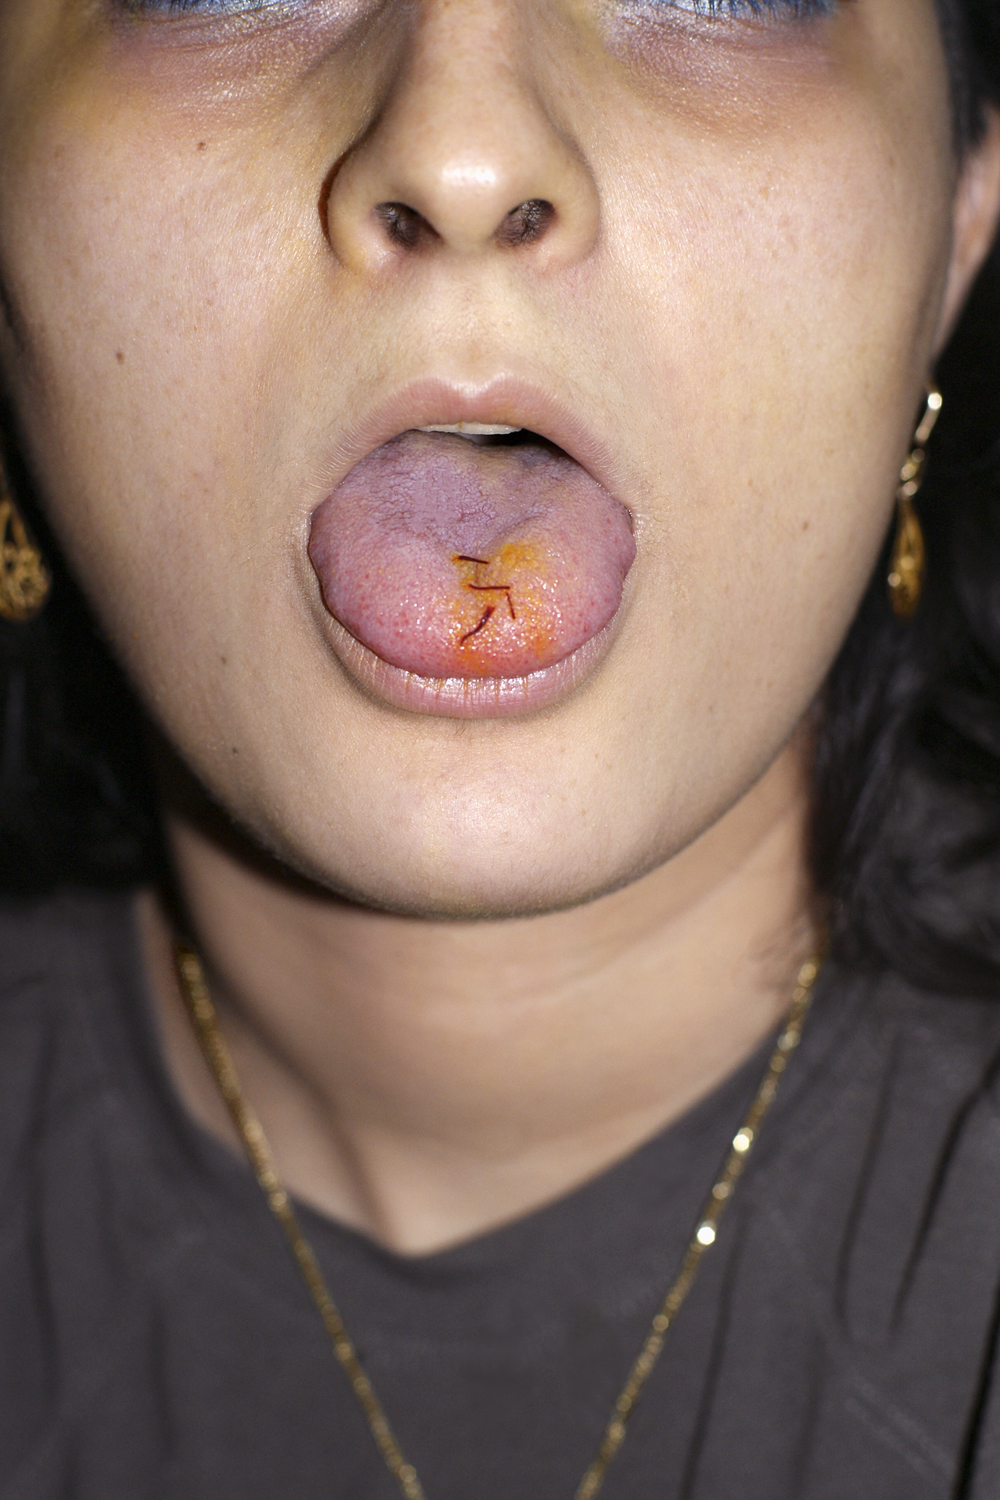   Zaferan on My Tongue   Archival Pigment Print  18.5” x 14.5” Framed  2019 